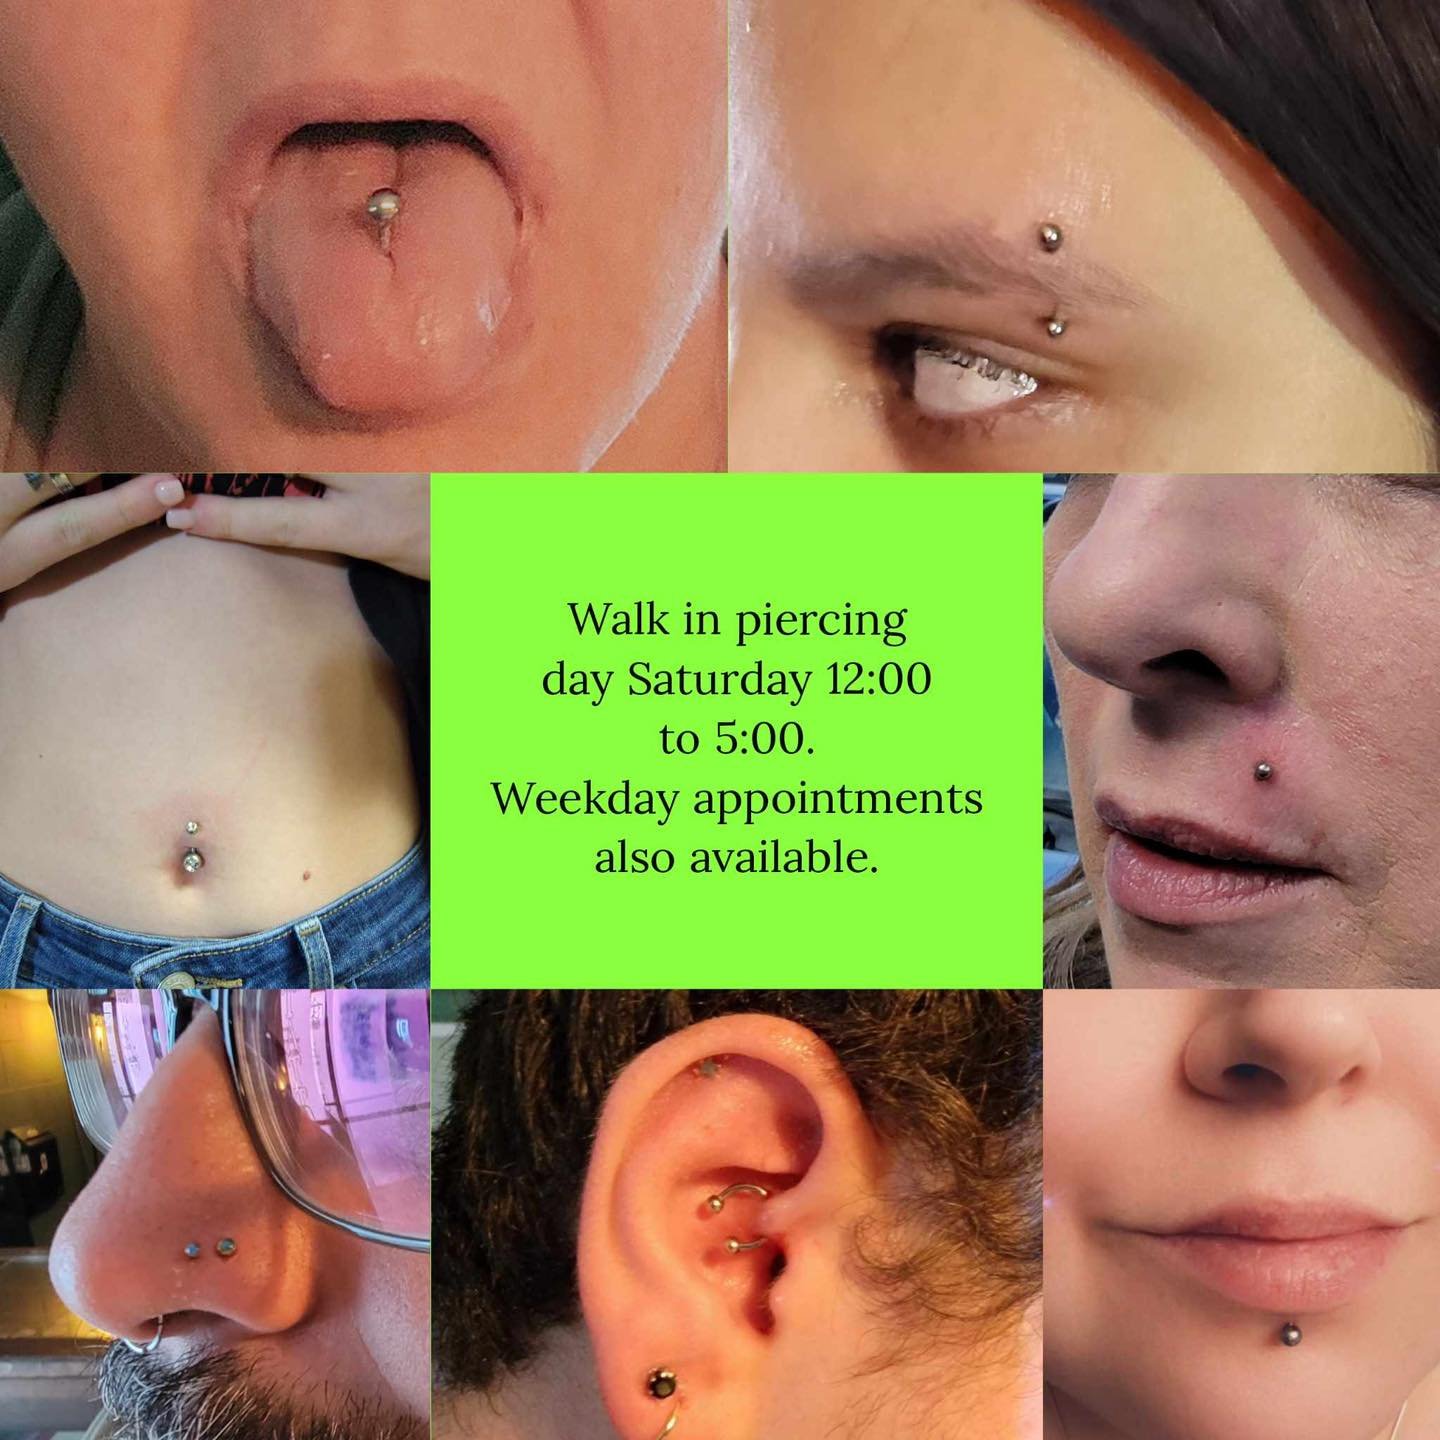 Walk-ins this Saturday. 
Some appointments available Wednesday, Friday, and Sunday. Contact us for an appointment or come by and check us out on Saturday.